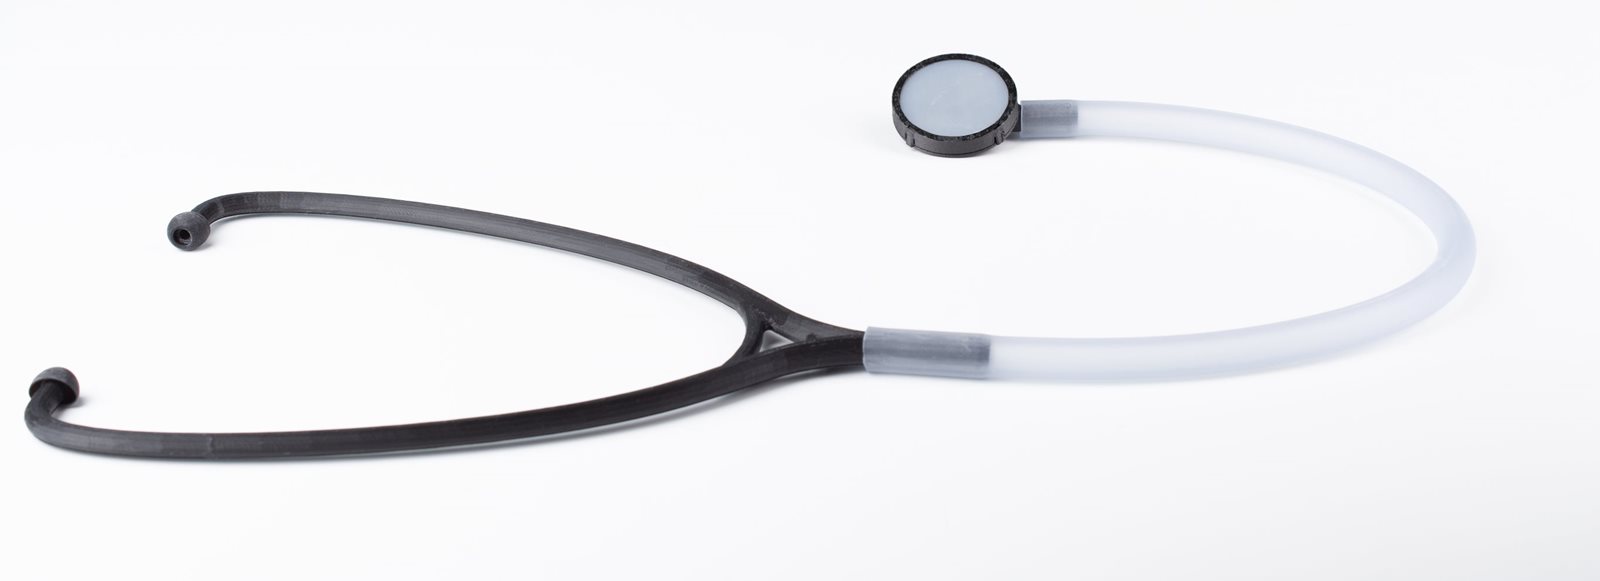 Disposable Stethoscope May Help Stop Spread of COVID and other Infectious Diseases